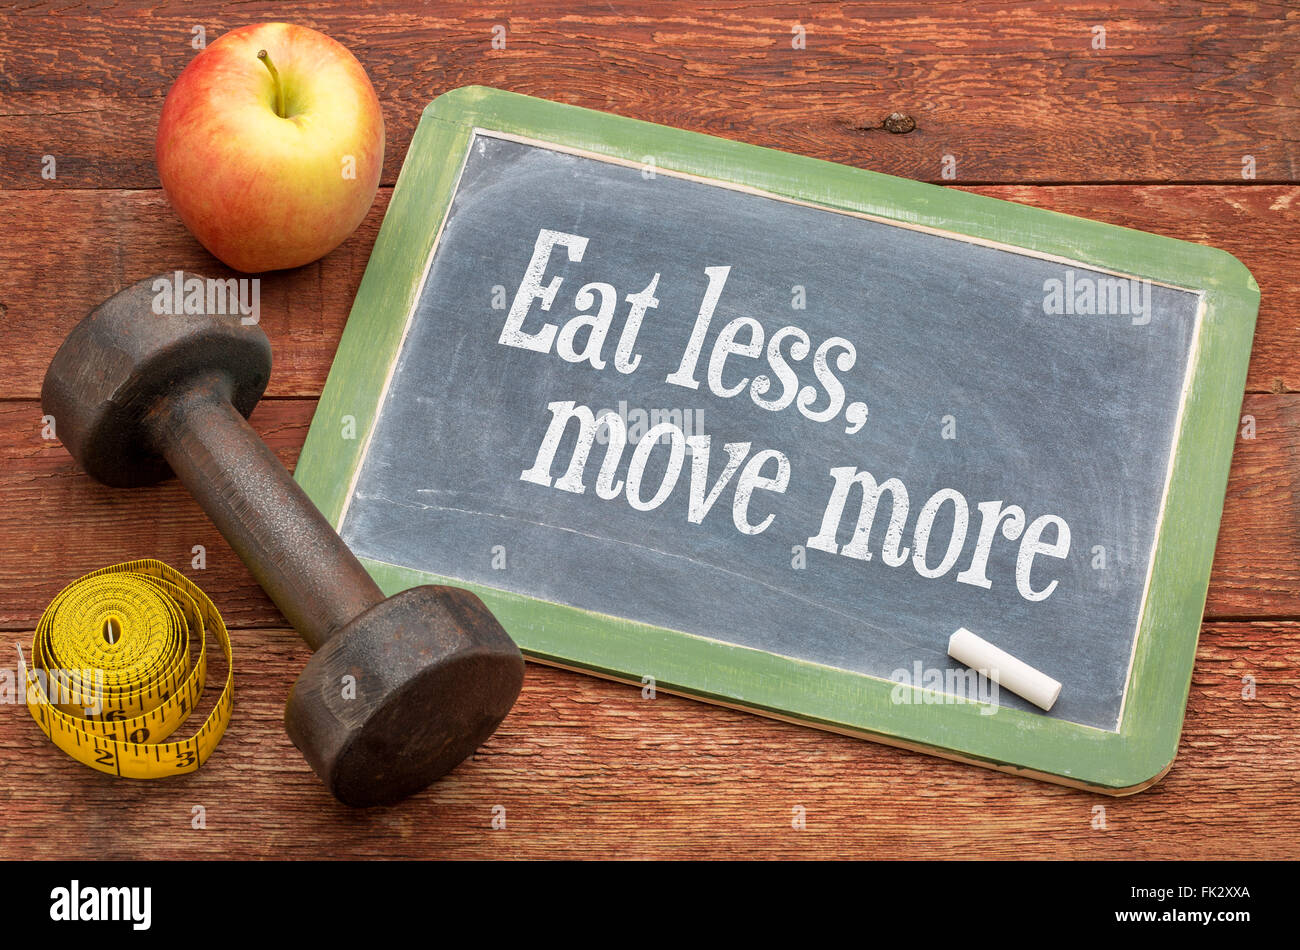 Eat less, move more fitness and healthy living  concept -  slate blackboard sign against weathered red painted barn wood Stock Photo